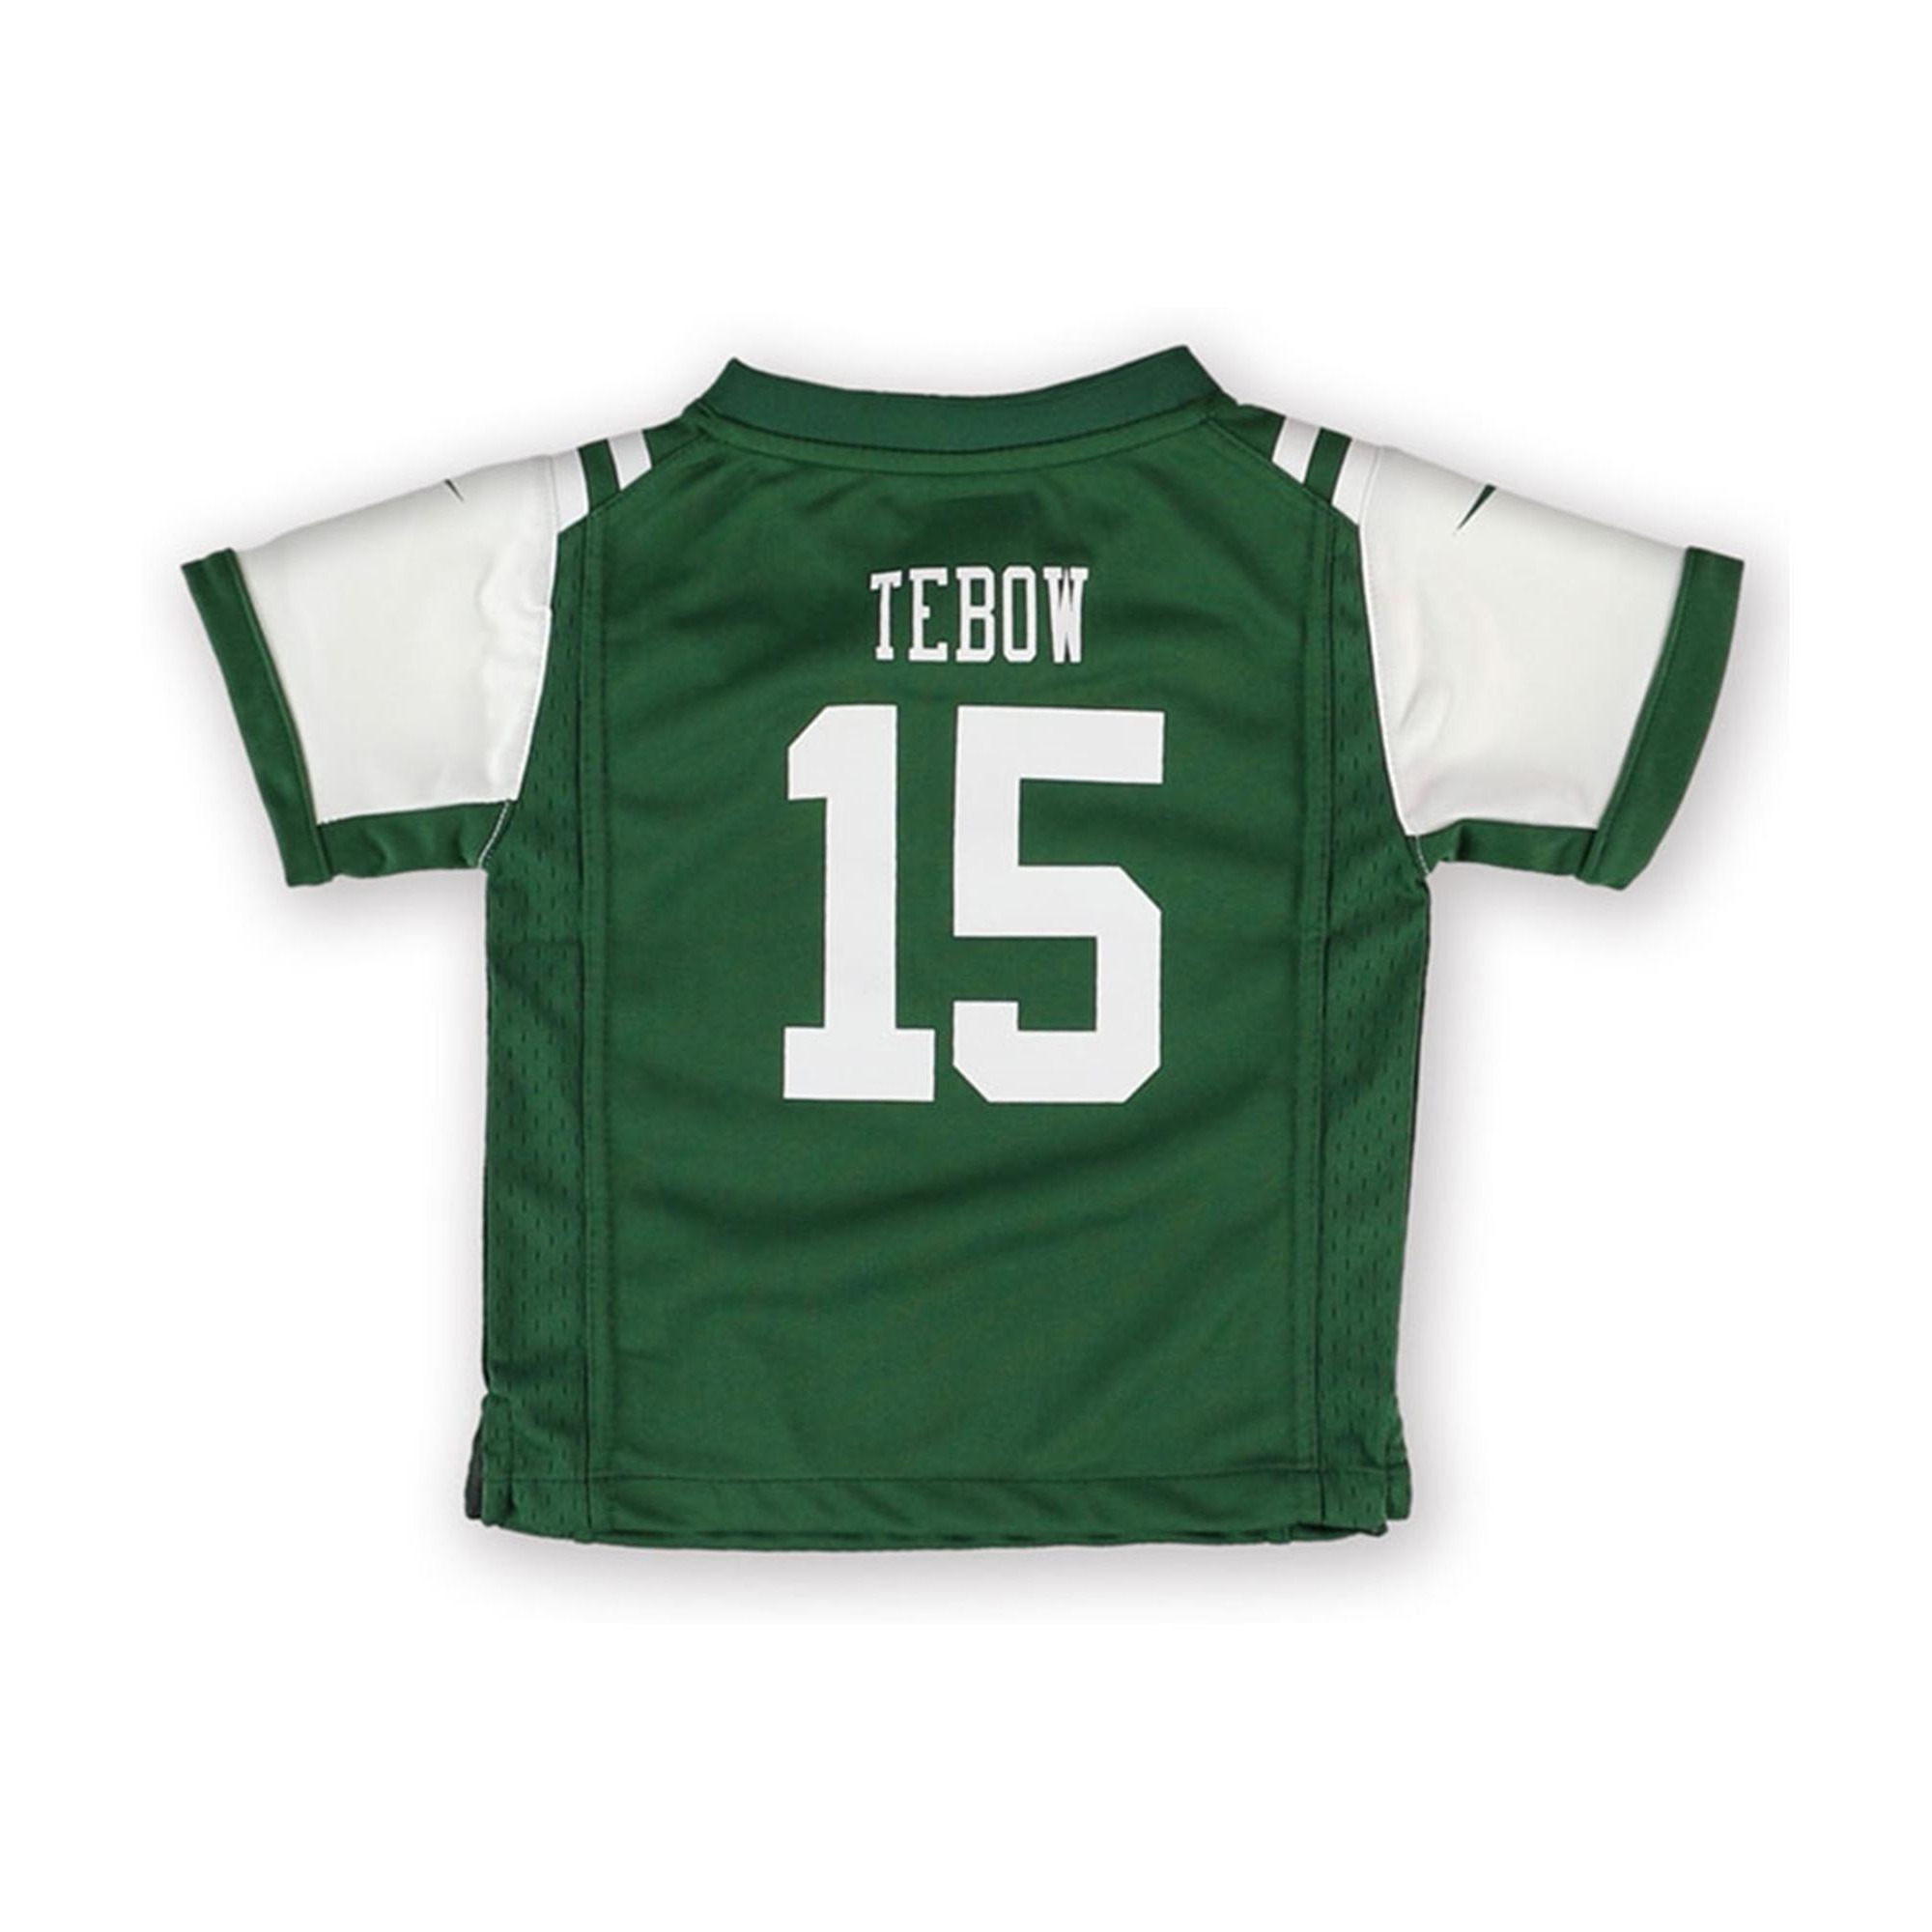 Nike Boys New York Jets Tebow Jersey, Style # 12N9P-4